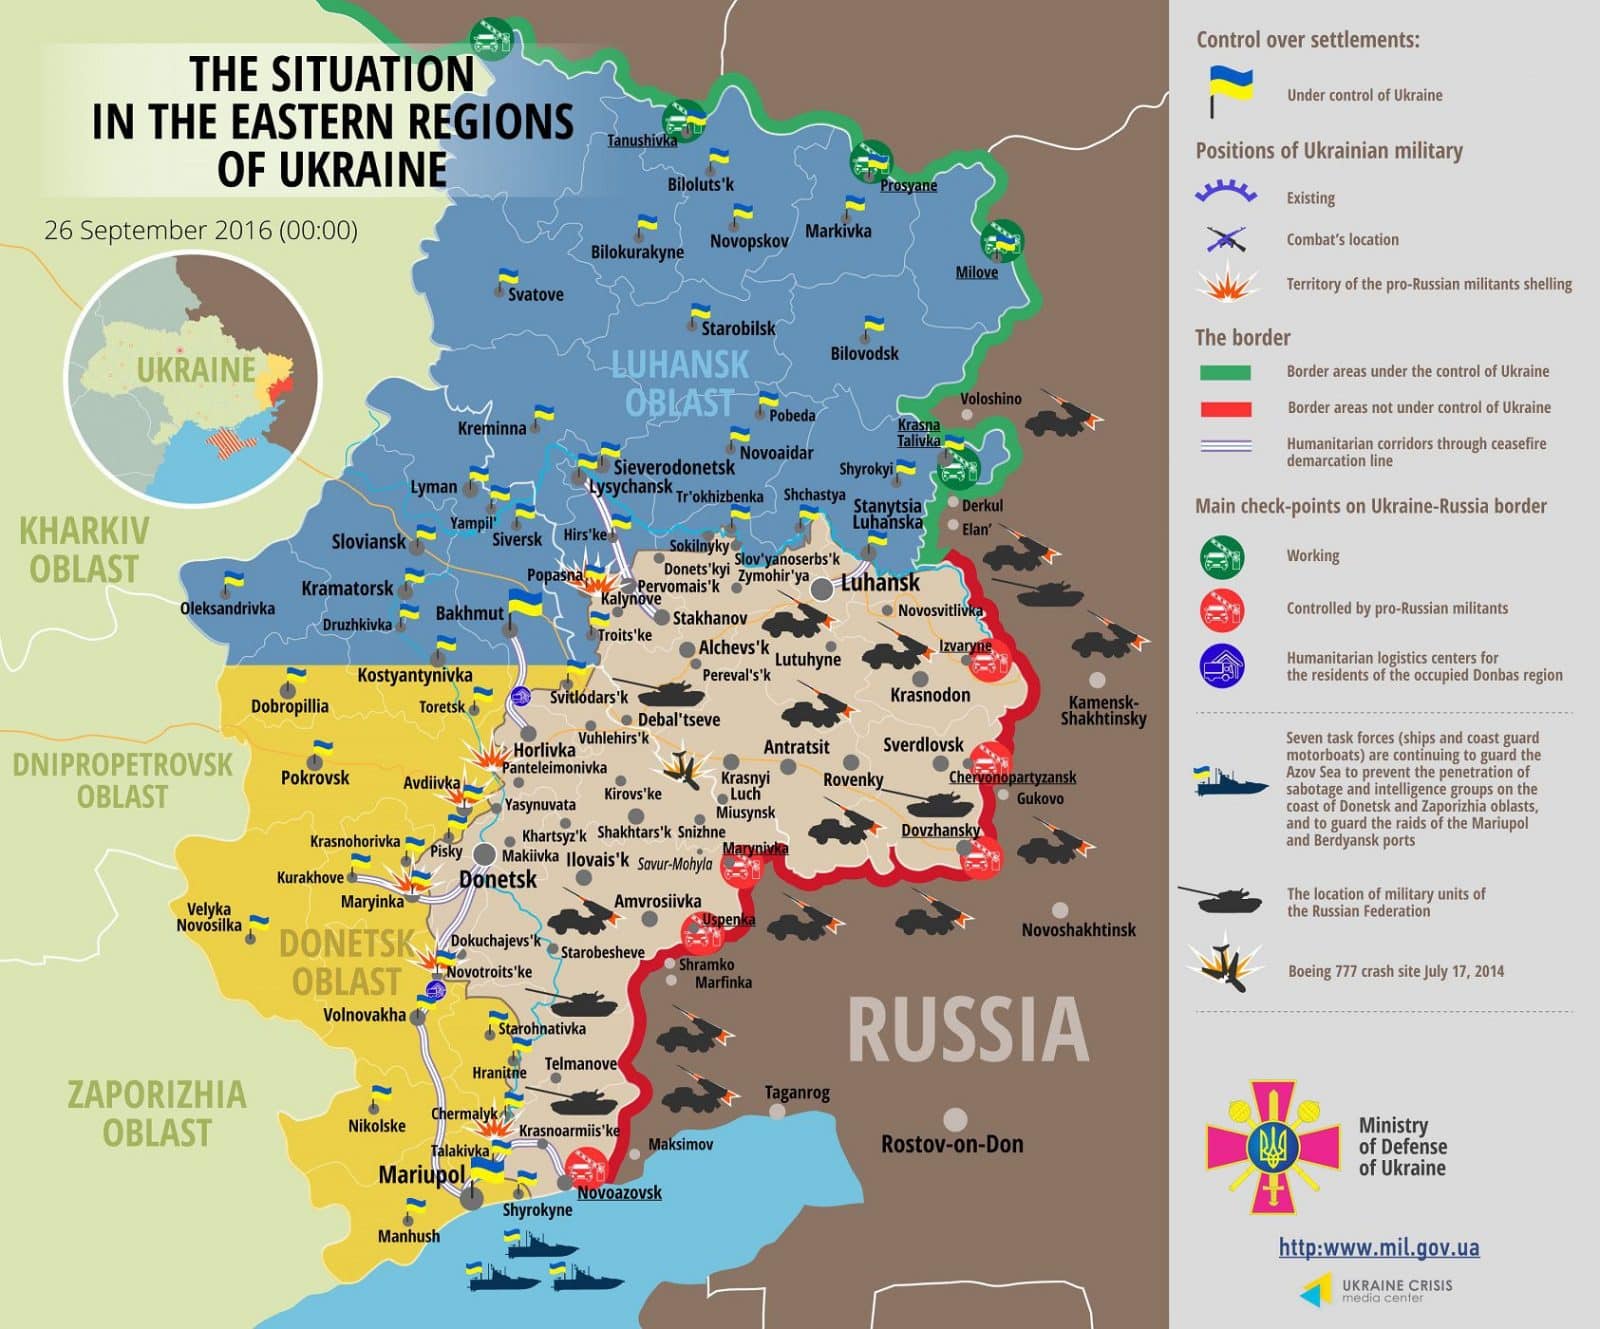 ”Ceasefire” in Donbas: Russian troops attack Ukraine 14 times in last day